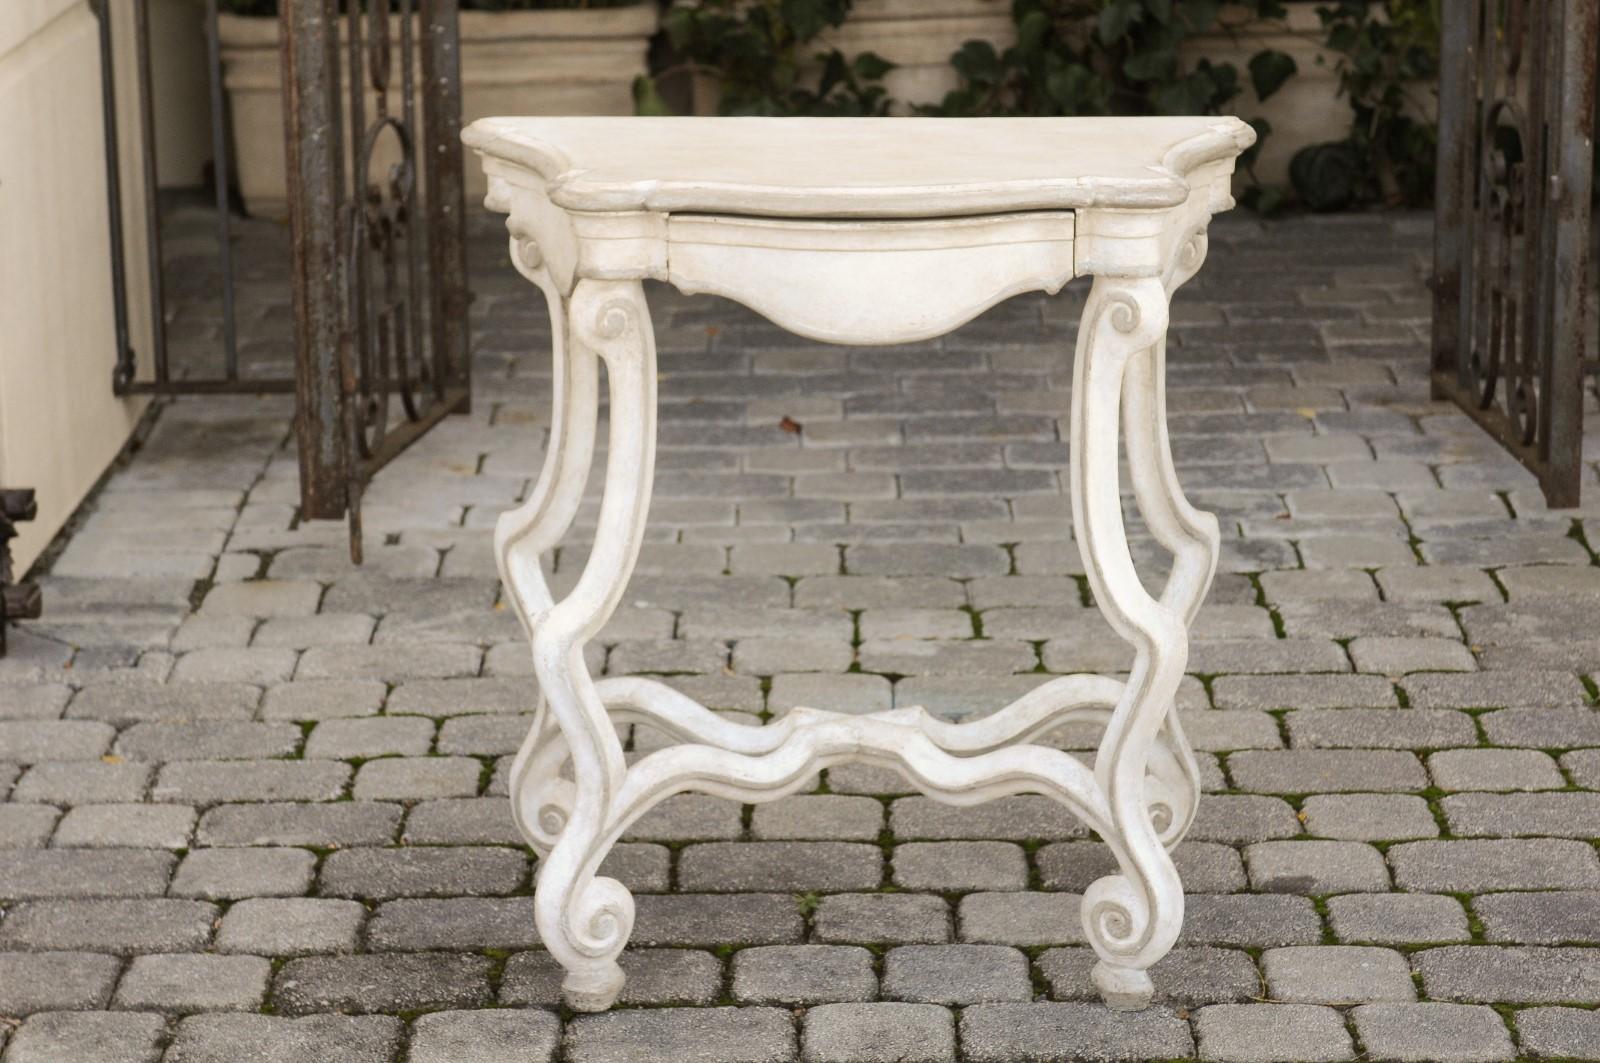 A French Rococo style painted console table from the early 20th century, with frieze drawer, scrolling legs and cross stretcher. Born in France at the turn of the 20th century during the Belle-Époque era, this exquisite painted console table